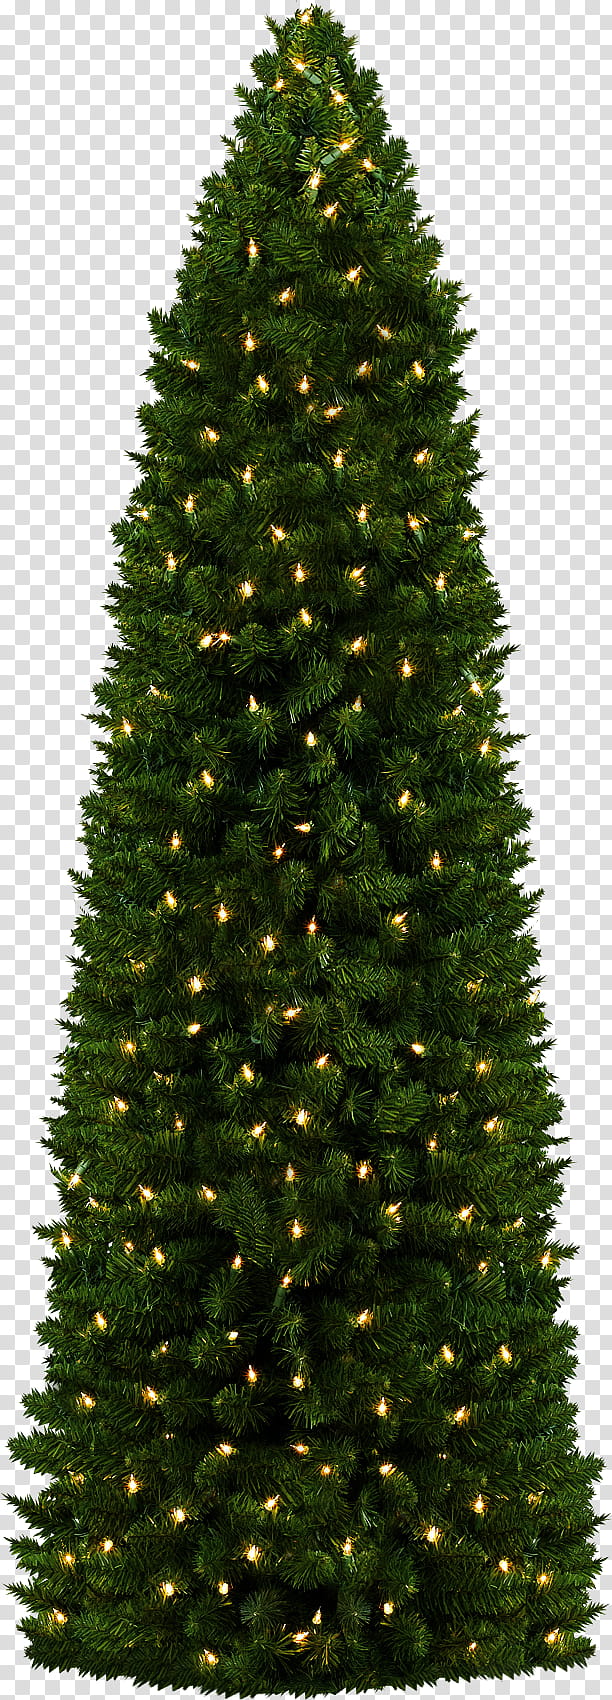 Christmas Tree, green Christmas tree transparent background PNG clipart